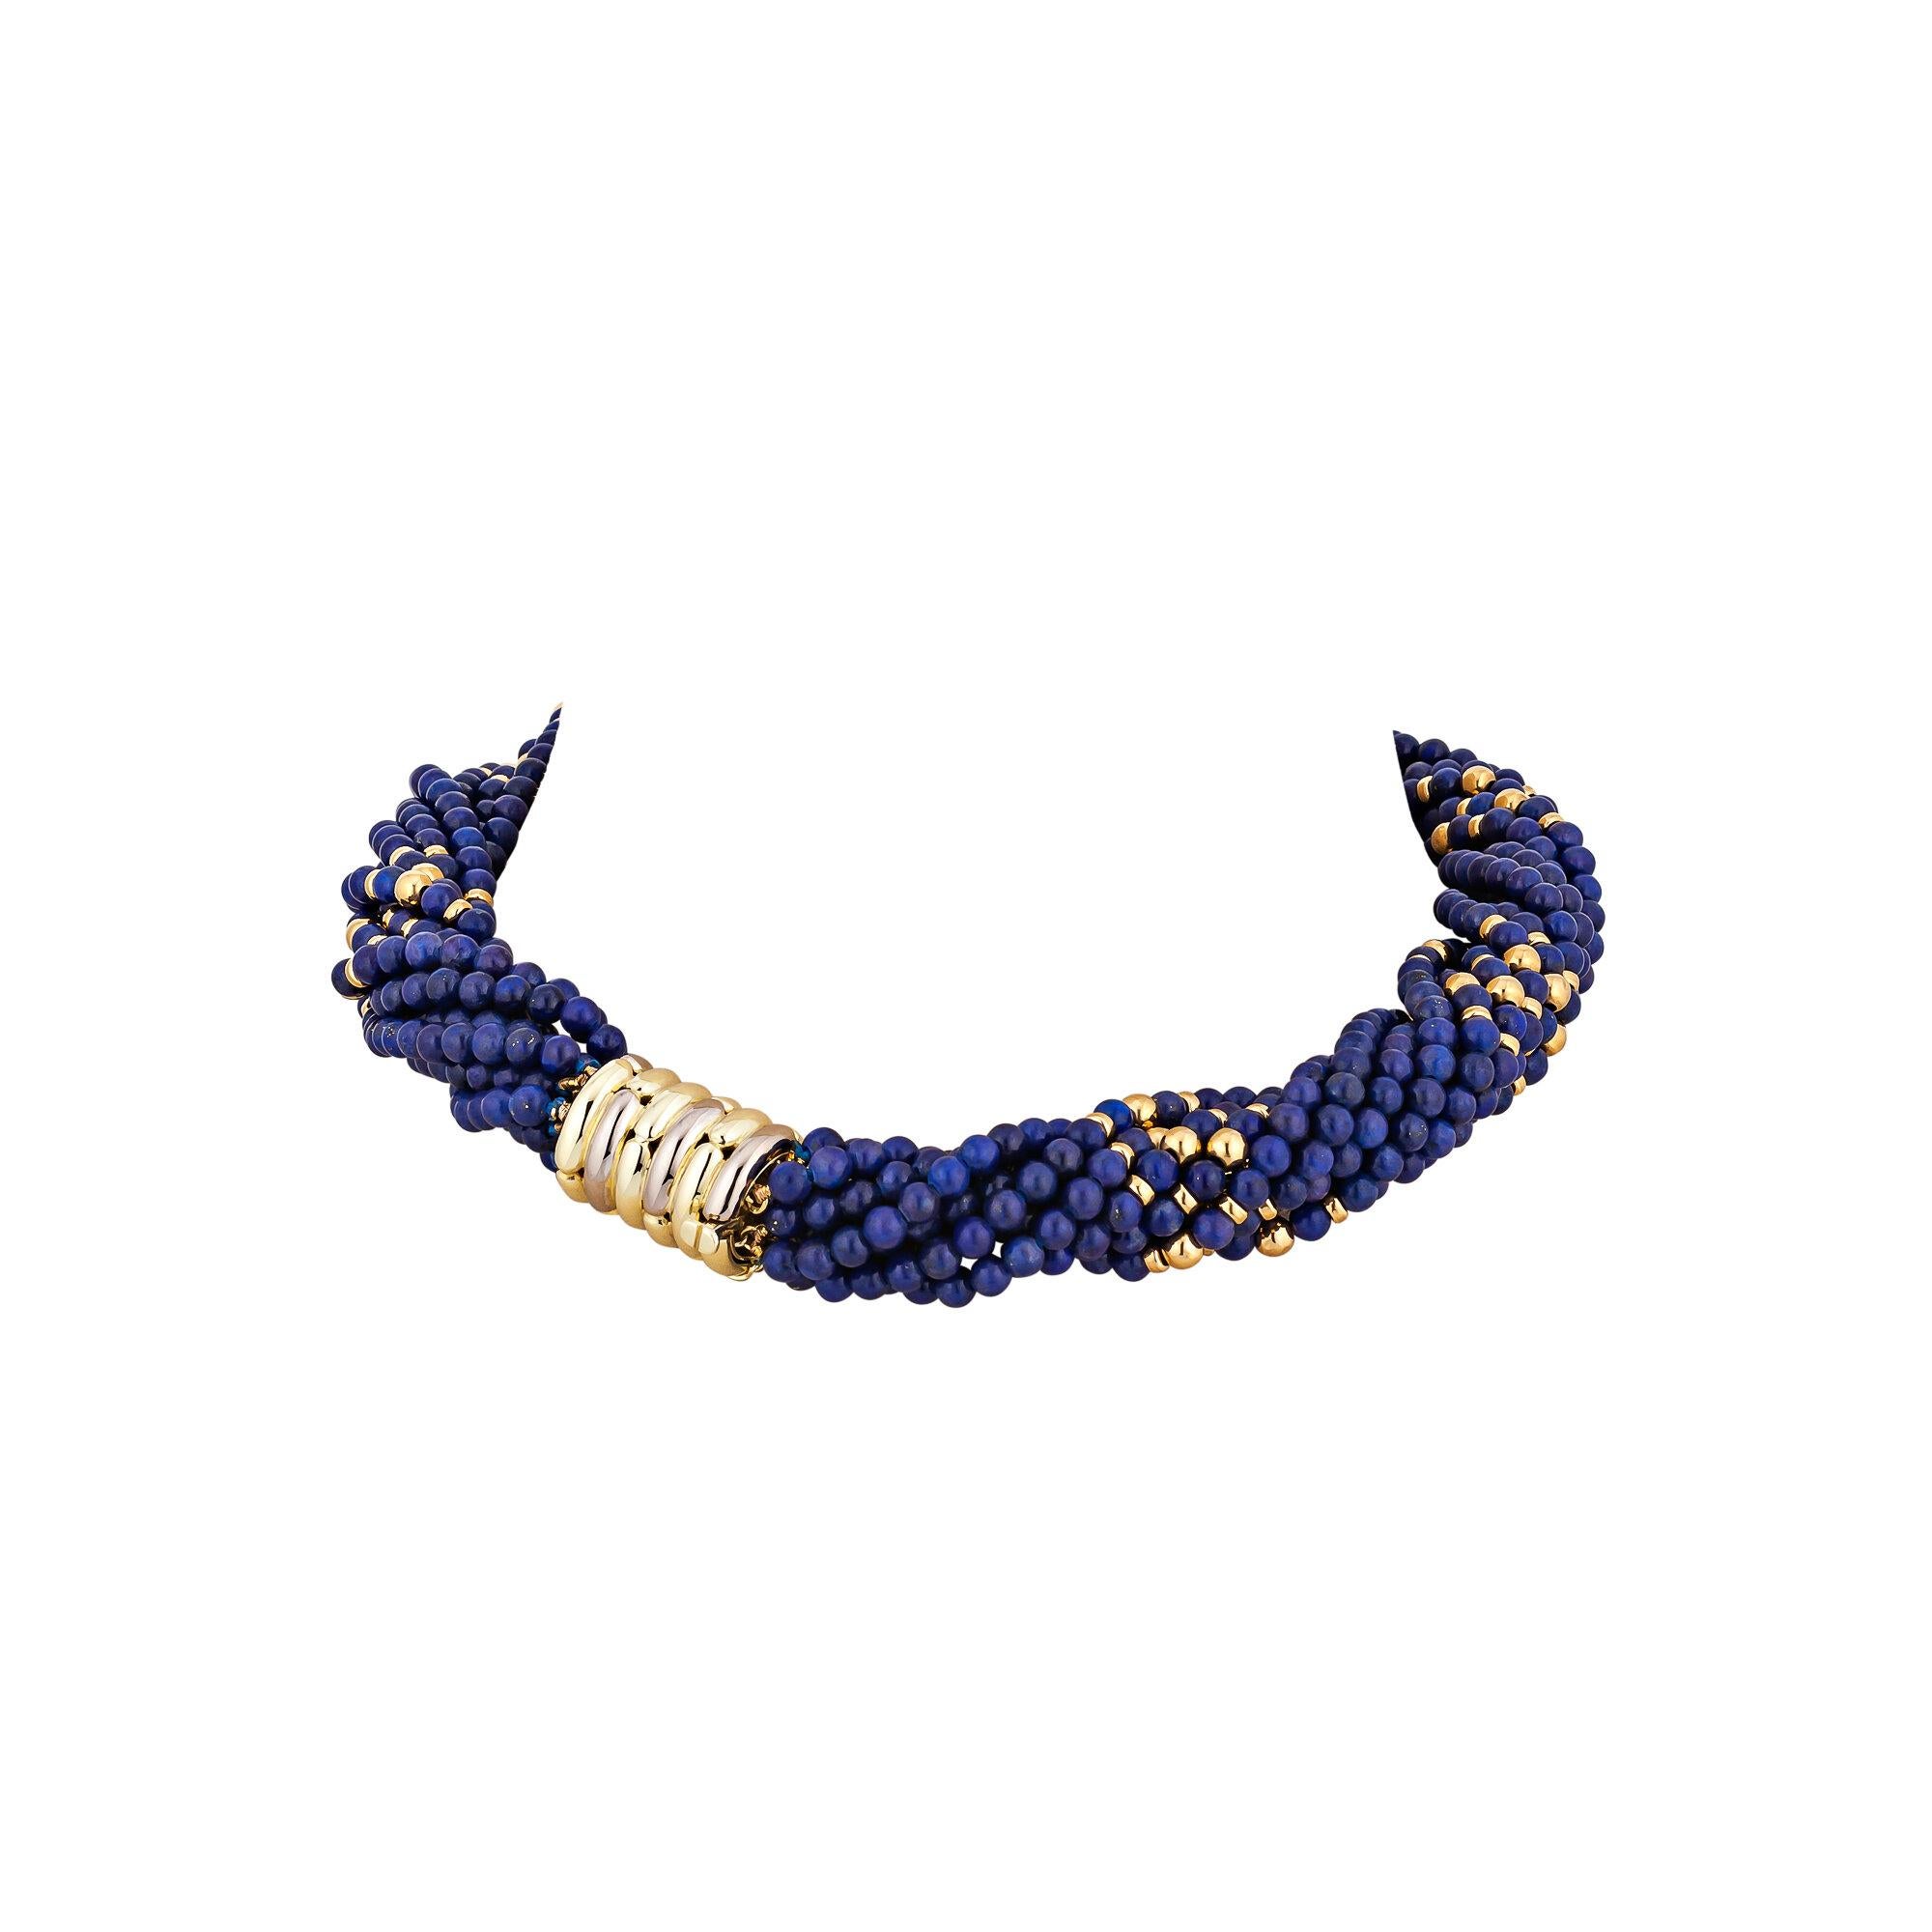 Like stars in the night, the 18 karat gold beads in this Tiffany & Co. vintage necklace mix magically with the deeply luscious midnight blue lapis beads creating this colorful one-of-a-kind choker necklace.  Ribbed 18 karat yellow gold closure is